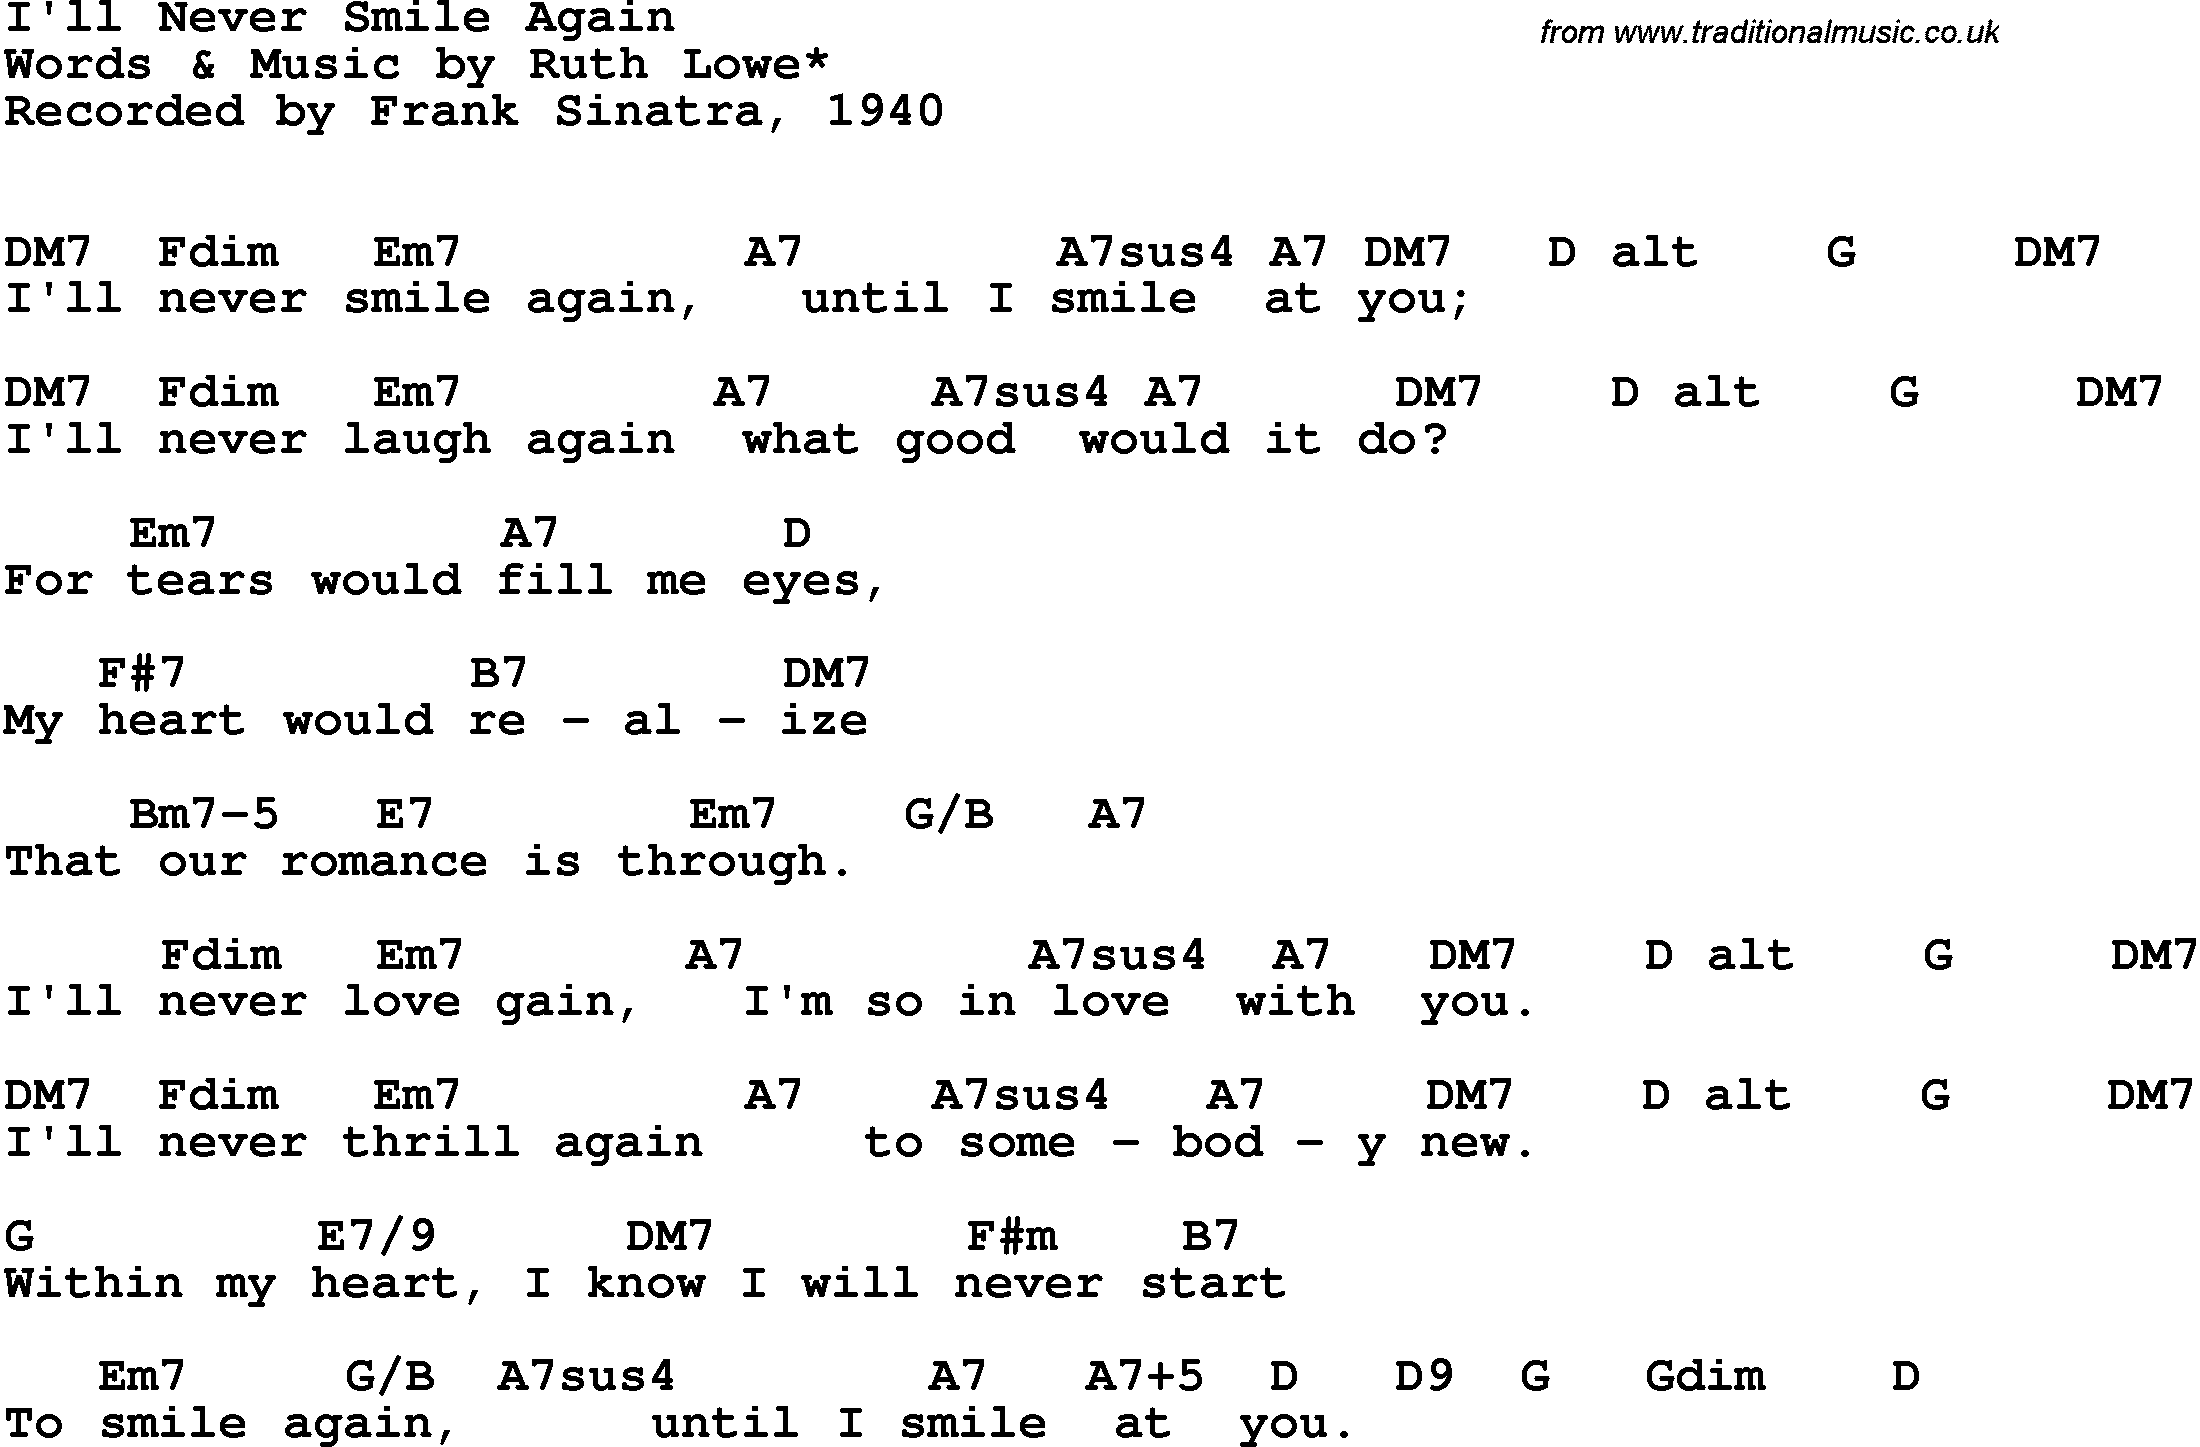 Song Lyrics with guitar chords for I'll Never Smile Again - Frank Sinatra, 1940